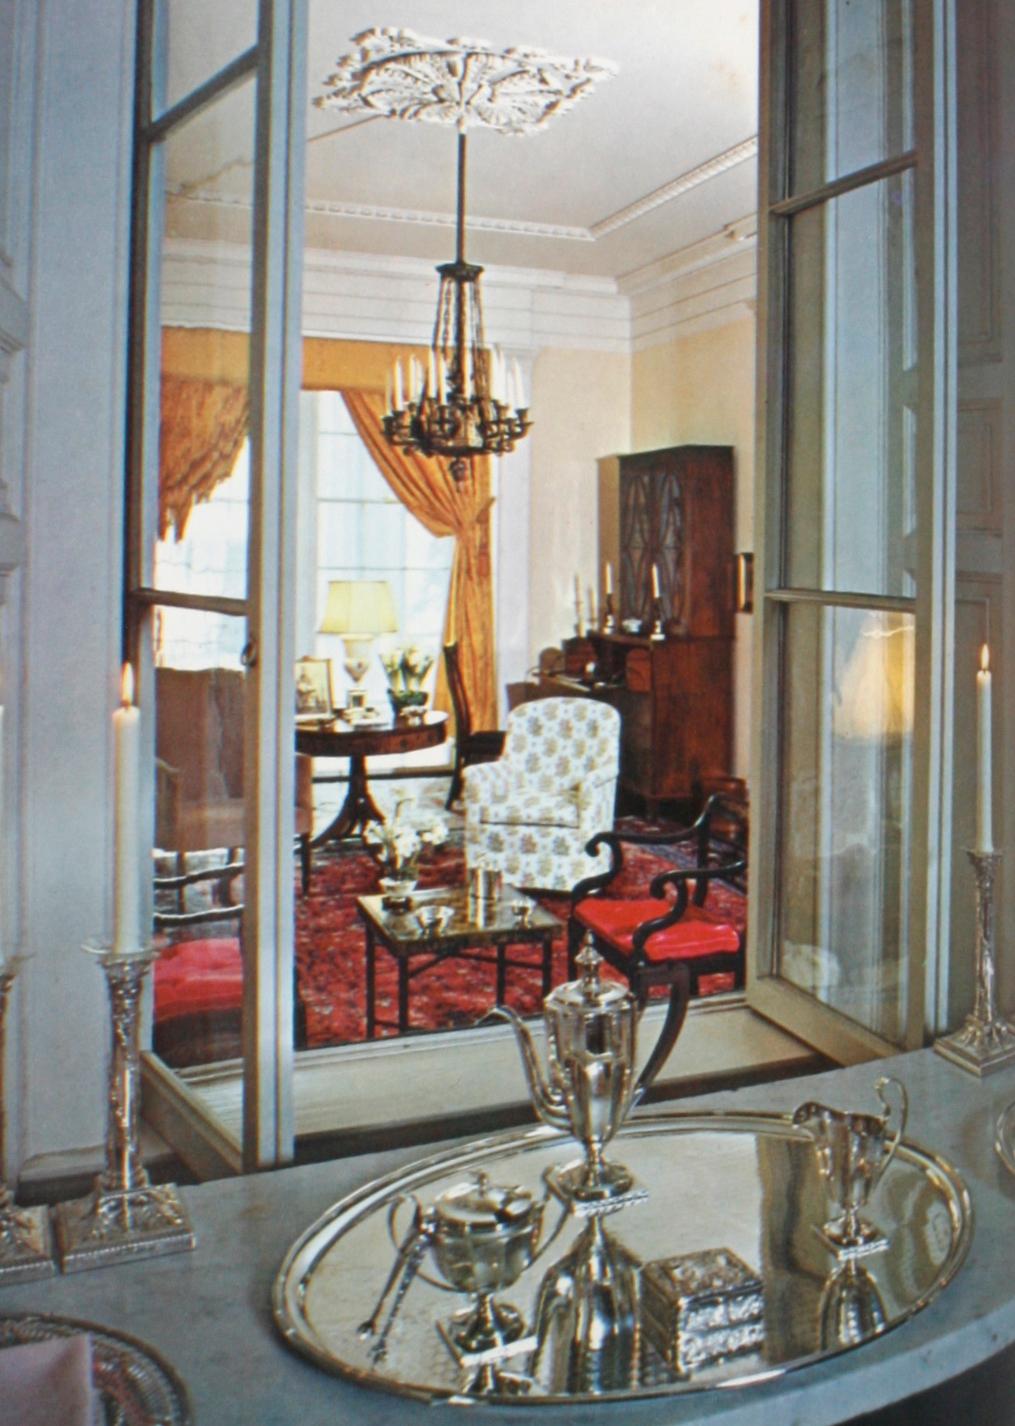 Treasure Rooms of America's Mansions Manors and Houses by Rita Reif. New York: Coward-McCann, Inc., 1970. 1st Ed hardcover with dust jacket. 297 pp. Survey of the nation's most beautifully decorated homes with descriptions of colors, fabrics, and